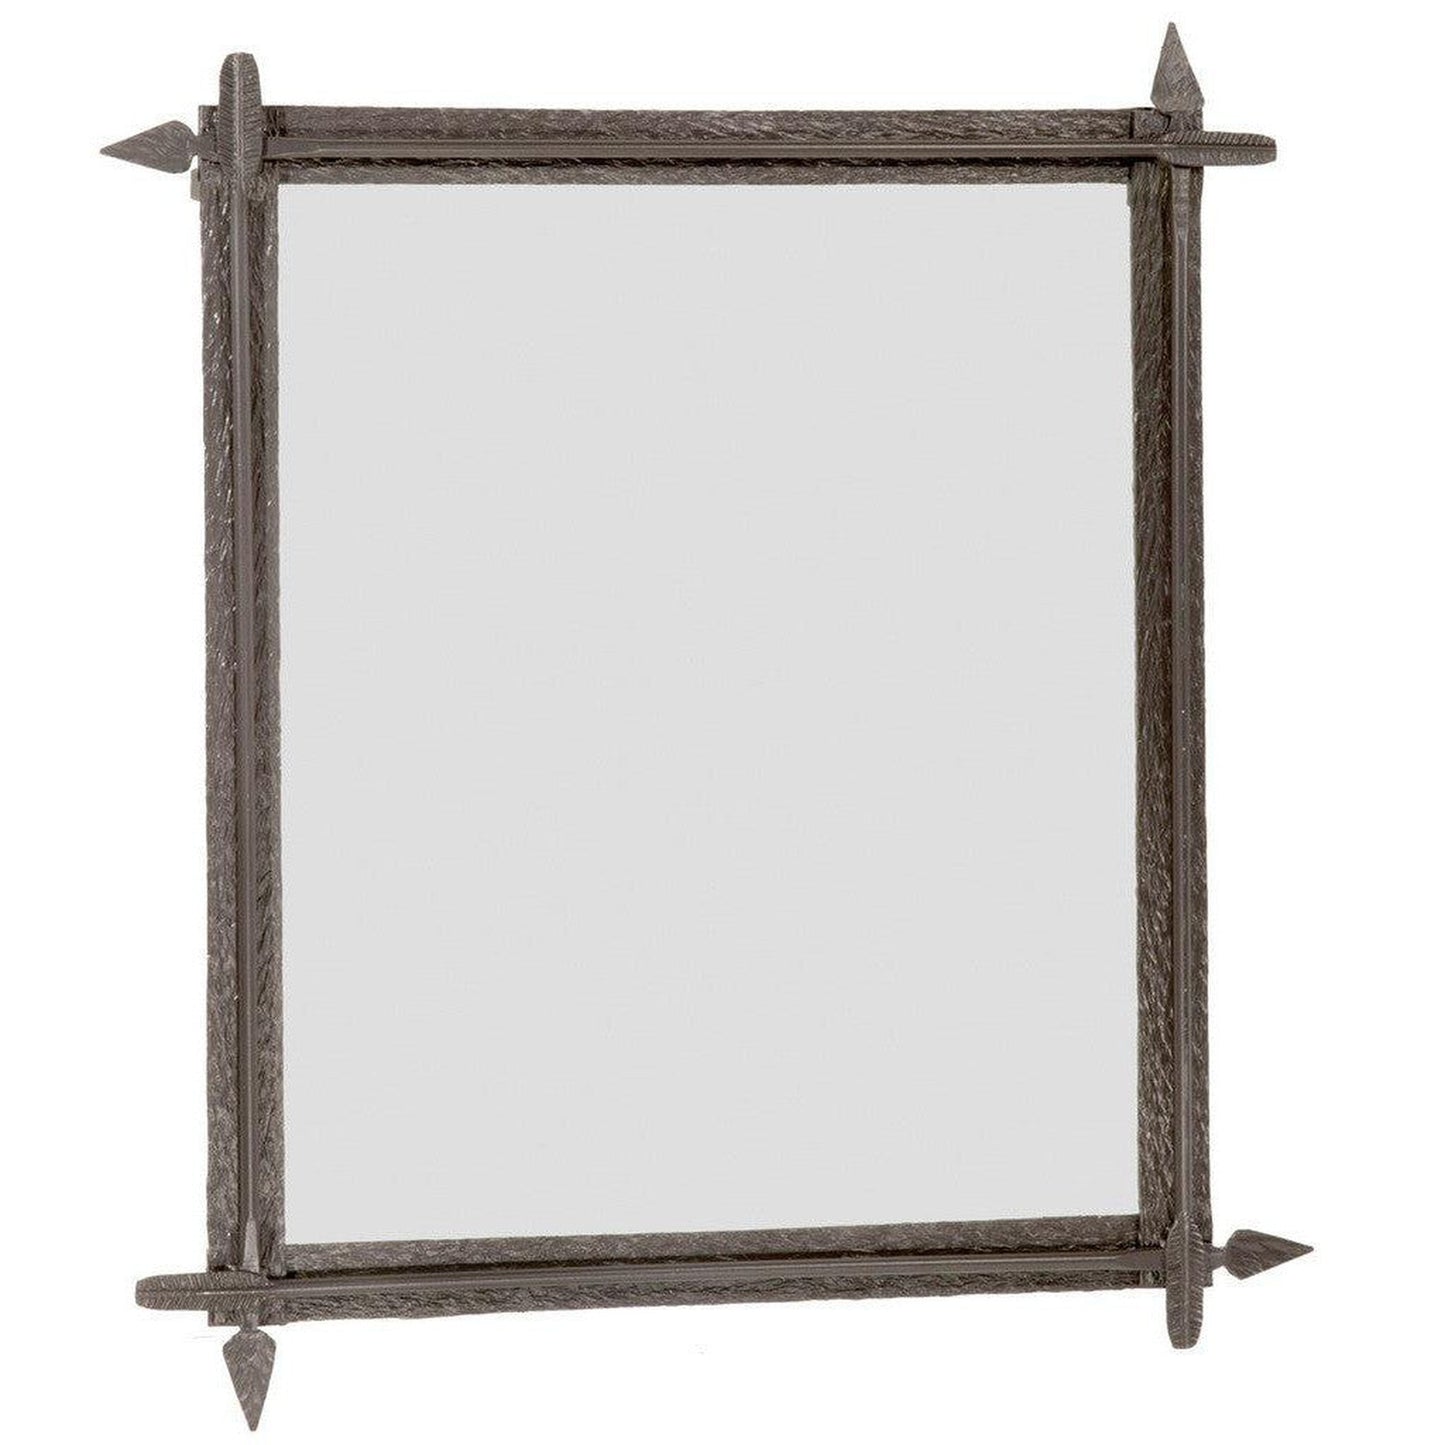 Stone County Ironworks Quapaw 28" x 32" Small Burnished Gold Iron Wall Mirror With Pewter Iron Accent